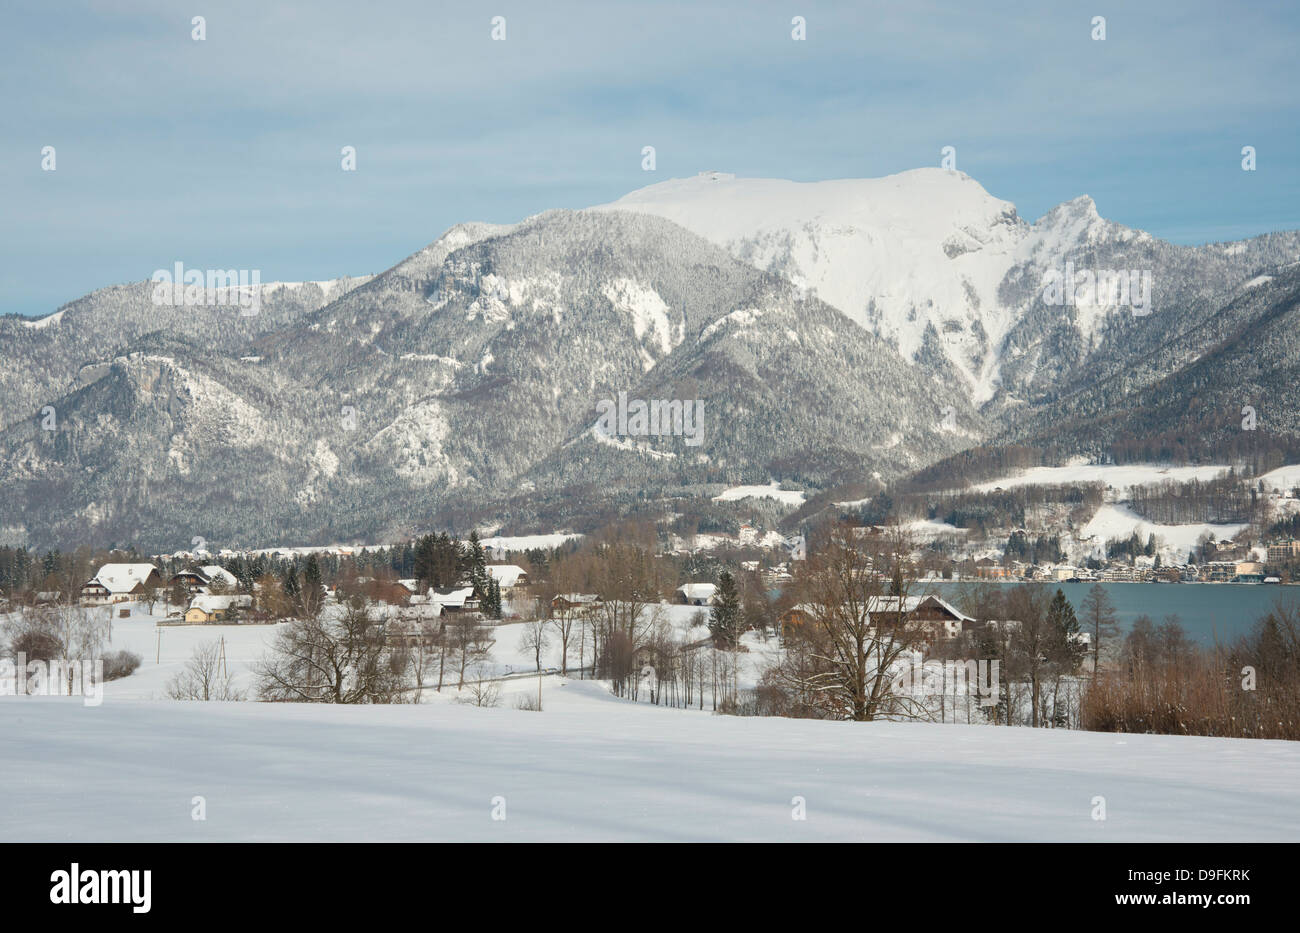 A view of snow covered mountains surrounding St. Wolfgangsee near the town of St. Wolfgang, Austria Stock Photo